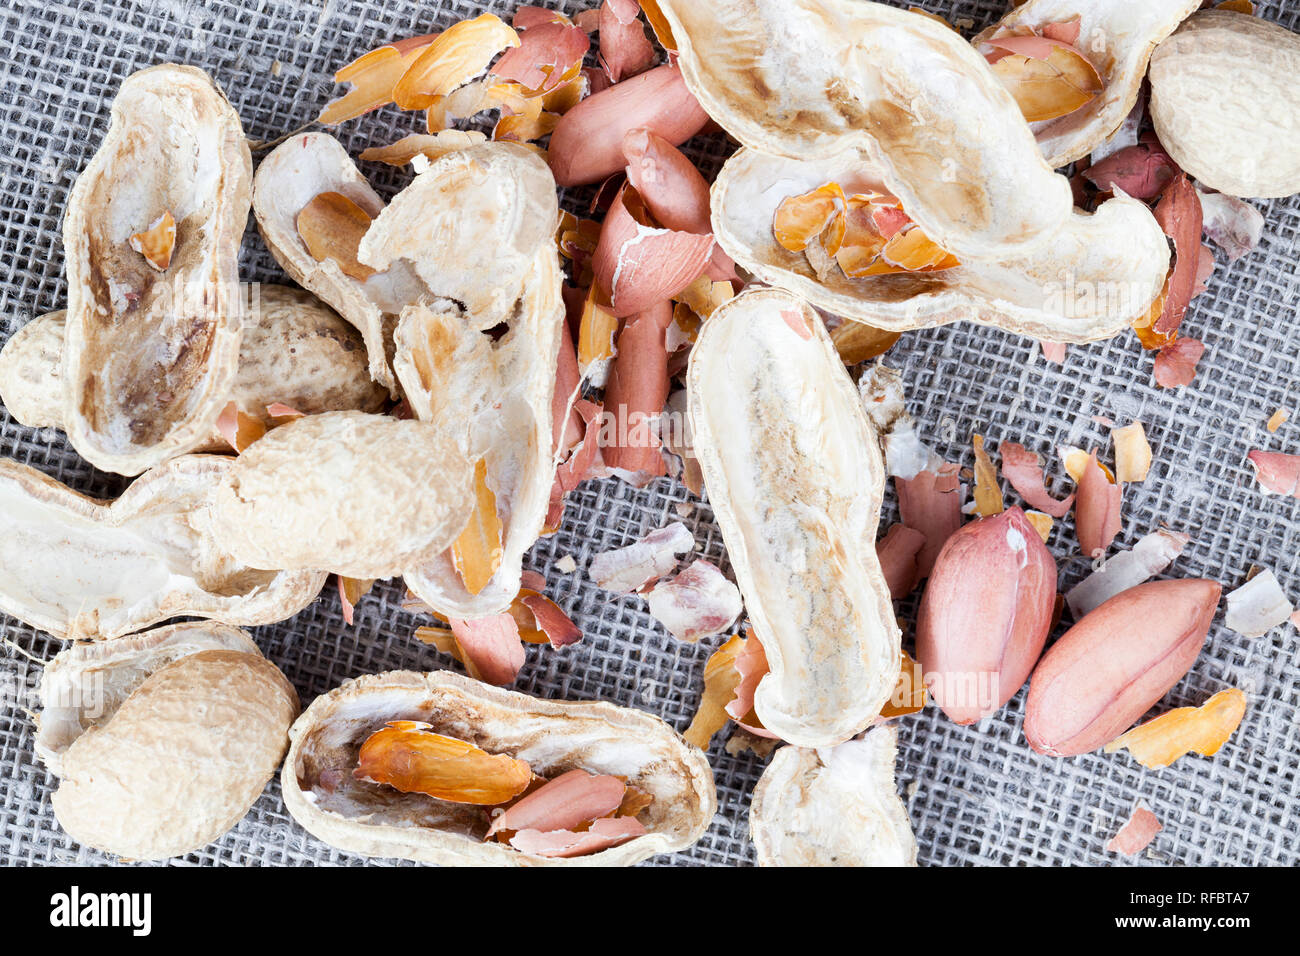 broken and peeled peanuts with shells, edible part without shells and ready for ingestion, lies a linen tablecloth in the kitchen Stock Photo